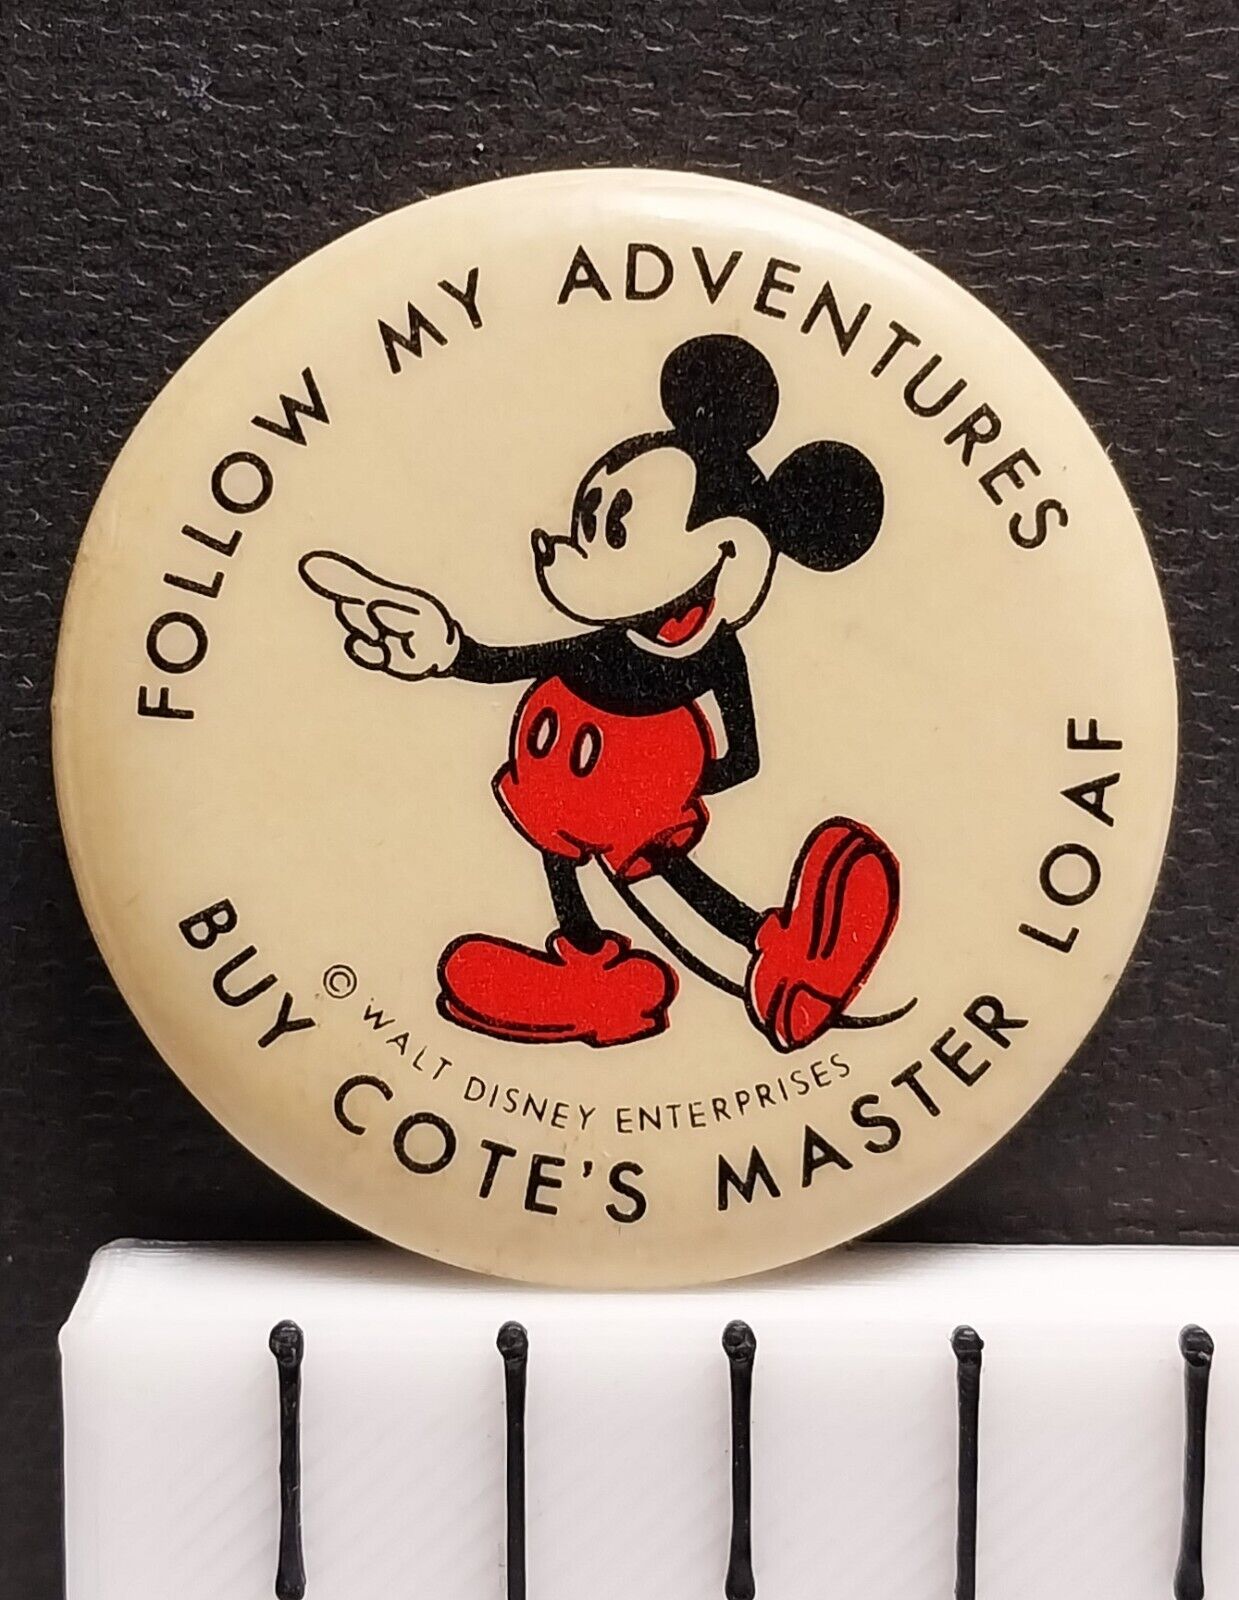 Mickey Mouse Follow My Adventures Buy Cote\'s Master Loaf Vintage Pin-Back Button